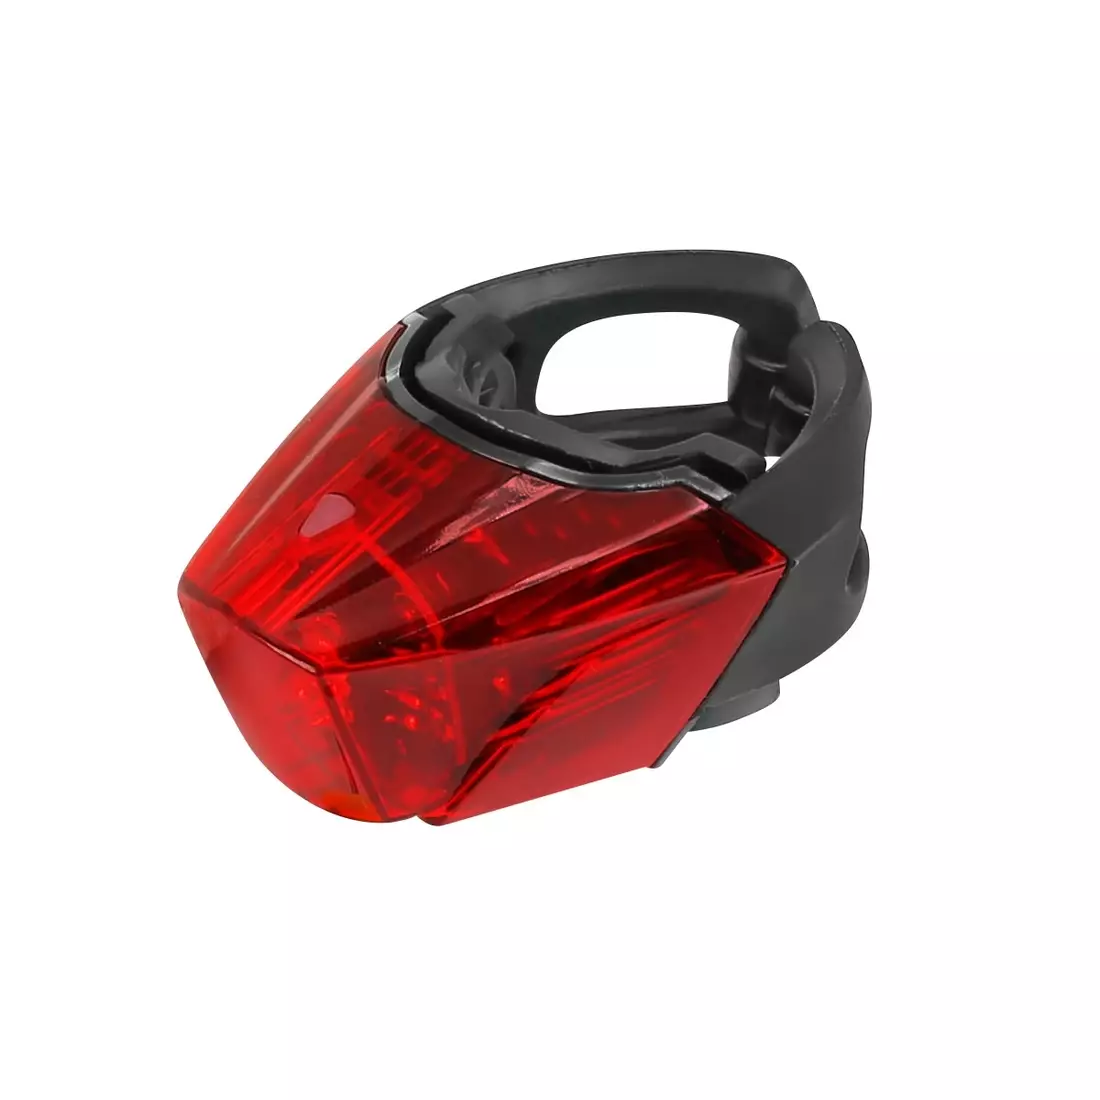 FORCE rear bicycle light crystal 3-LEDs USB 45381